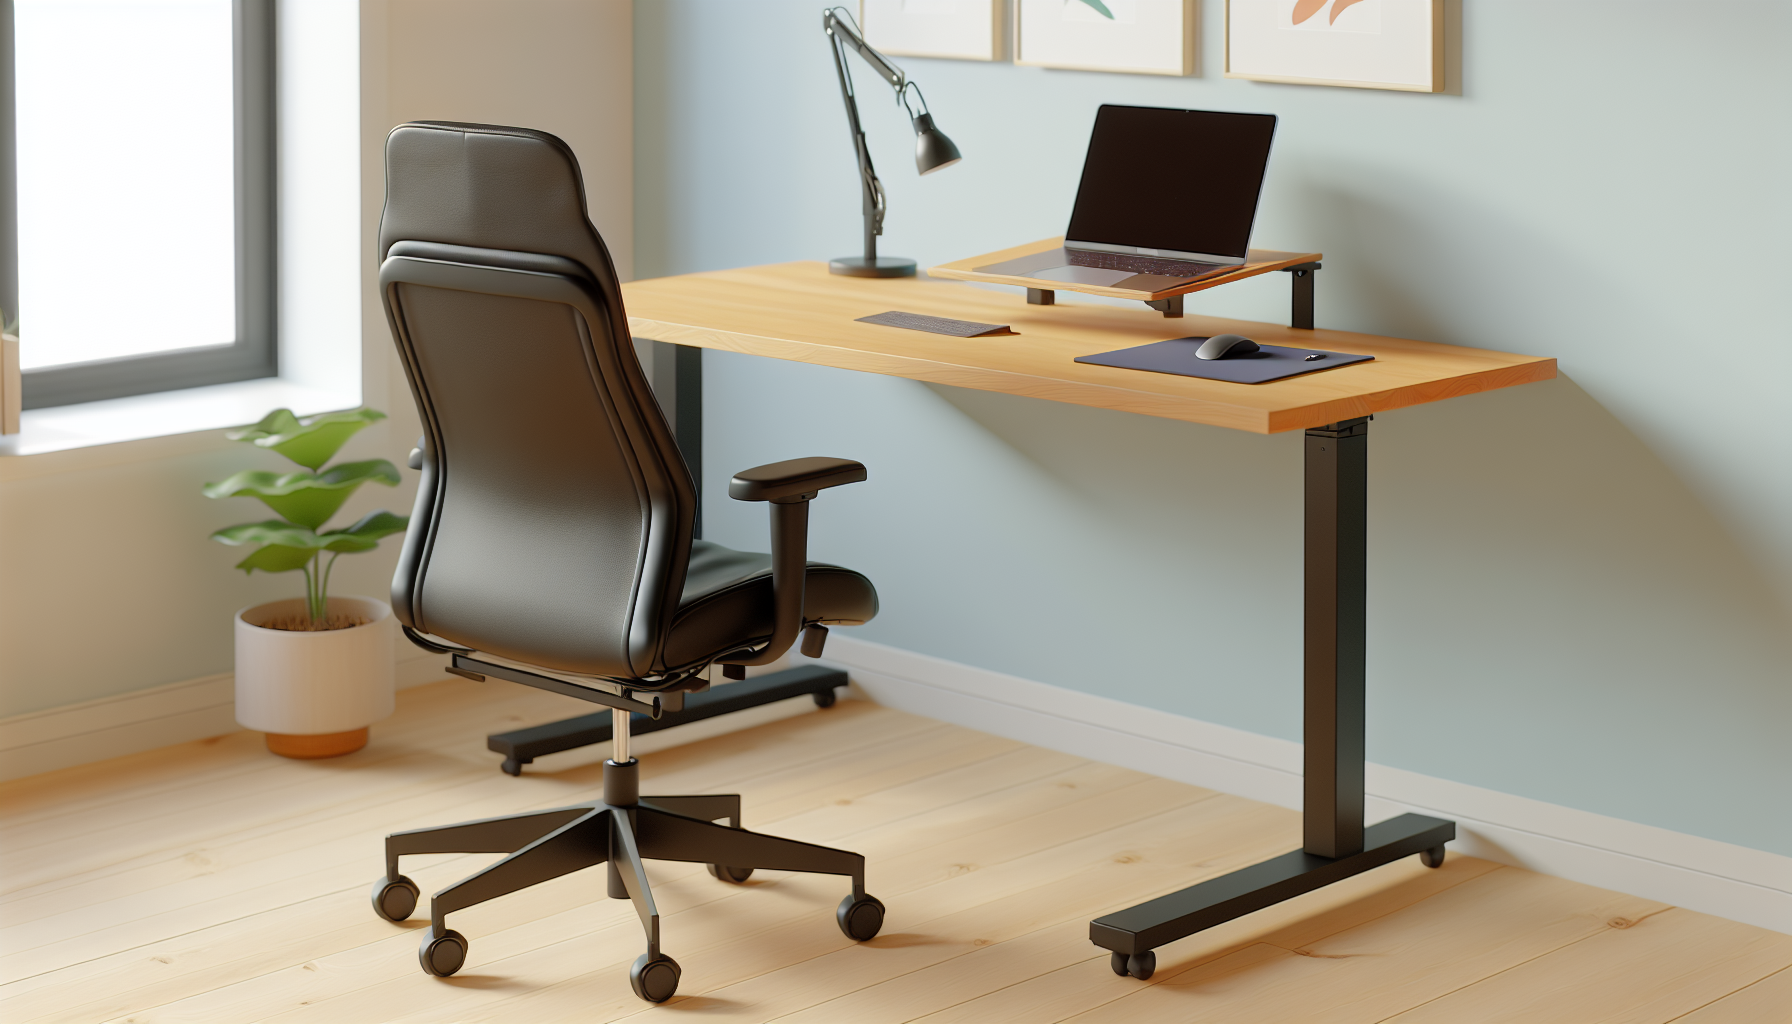 Ergonomic office chair and adjustable standing desk in a home office